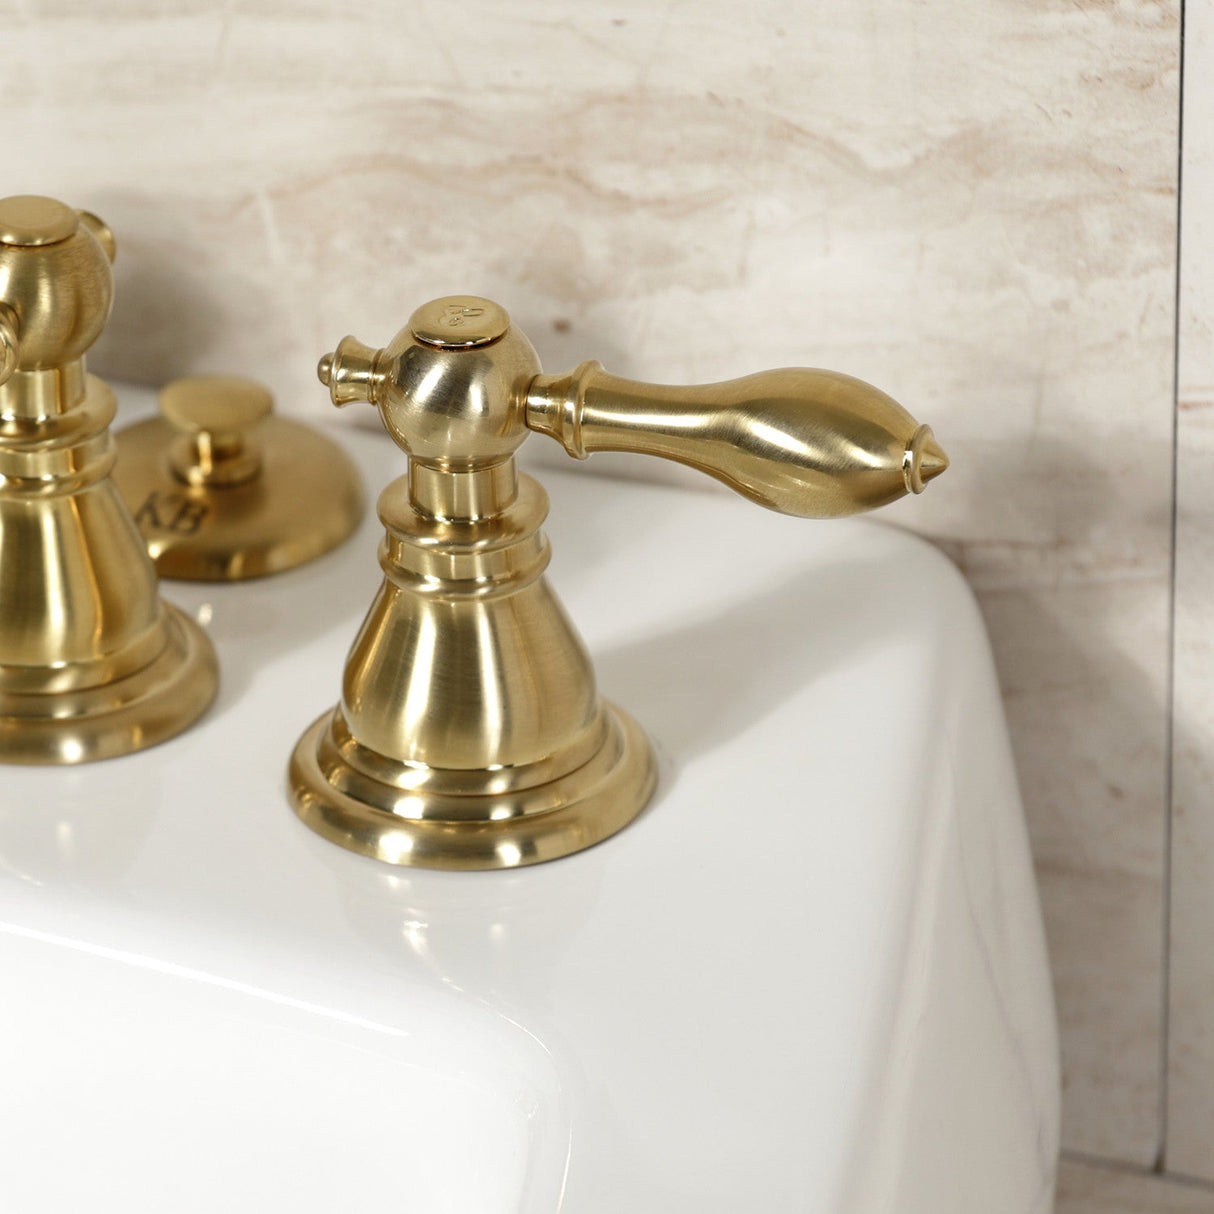 American Classic KB327ACL Three-Handle Vertical Spray Bidet Faucet with Brass Pop-Up, Brushed Brass